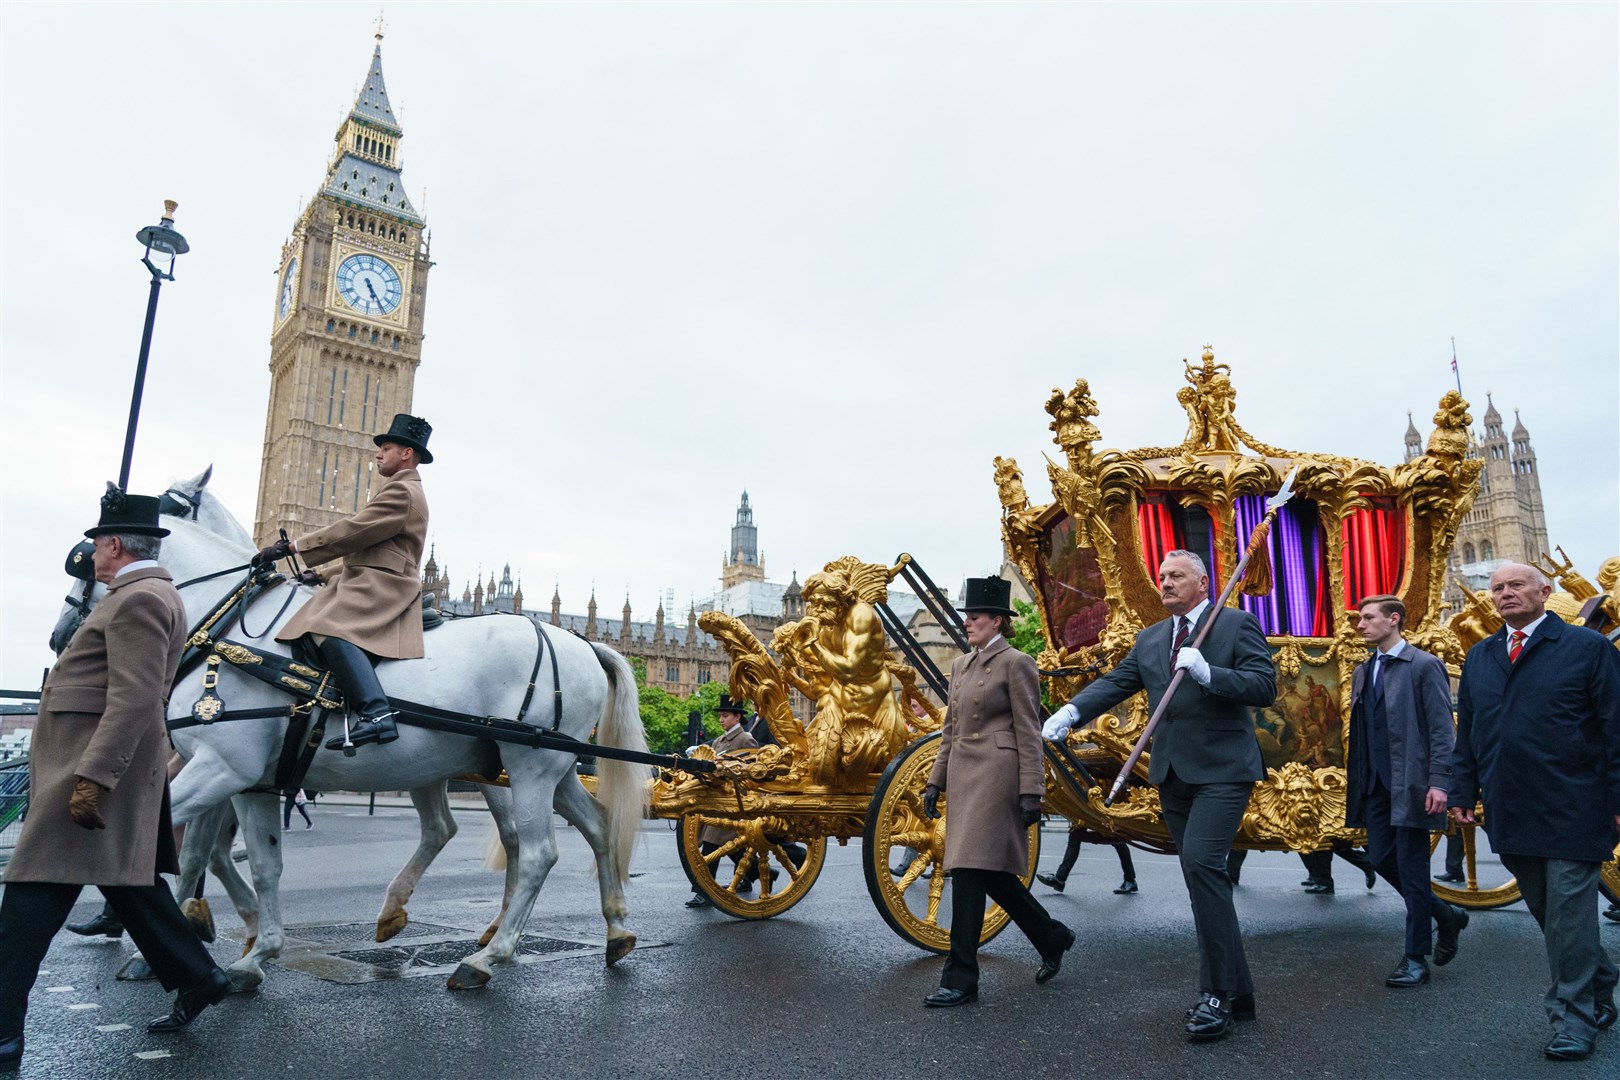 The gold state coach passes the Houses of Parliament during an early morning rehearsal (Dominic Lipinski/PA)